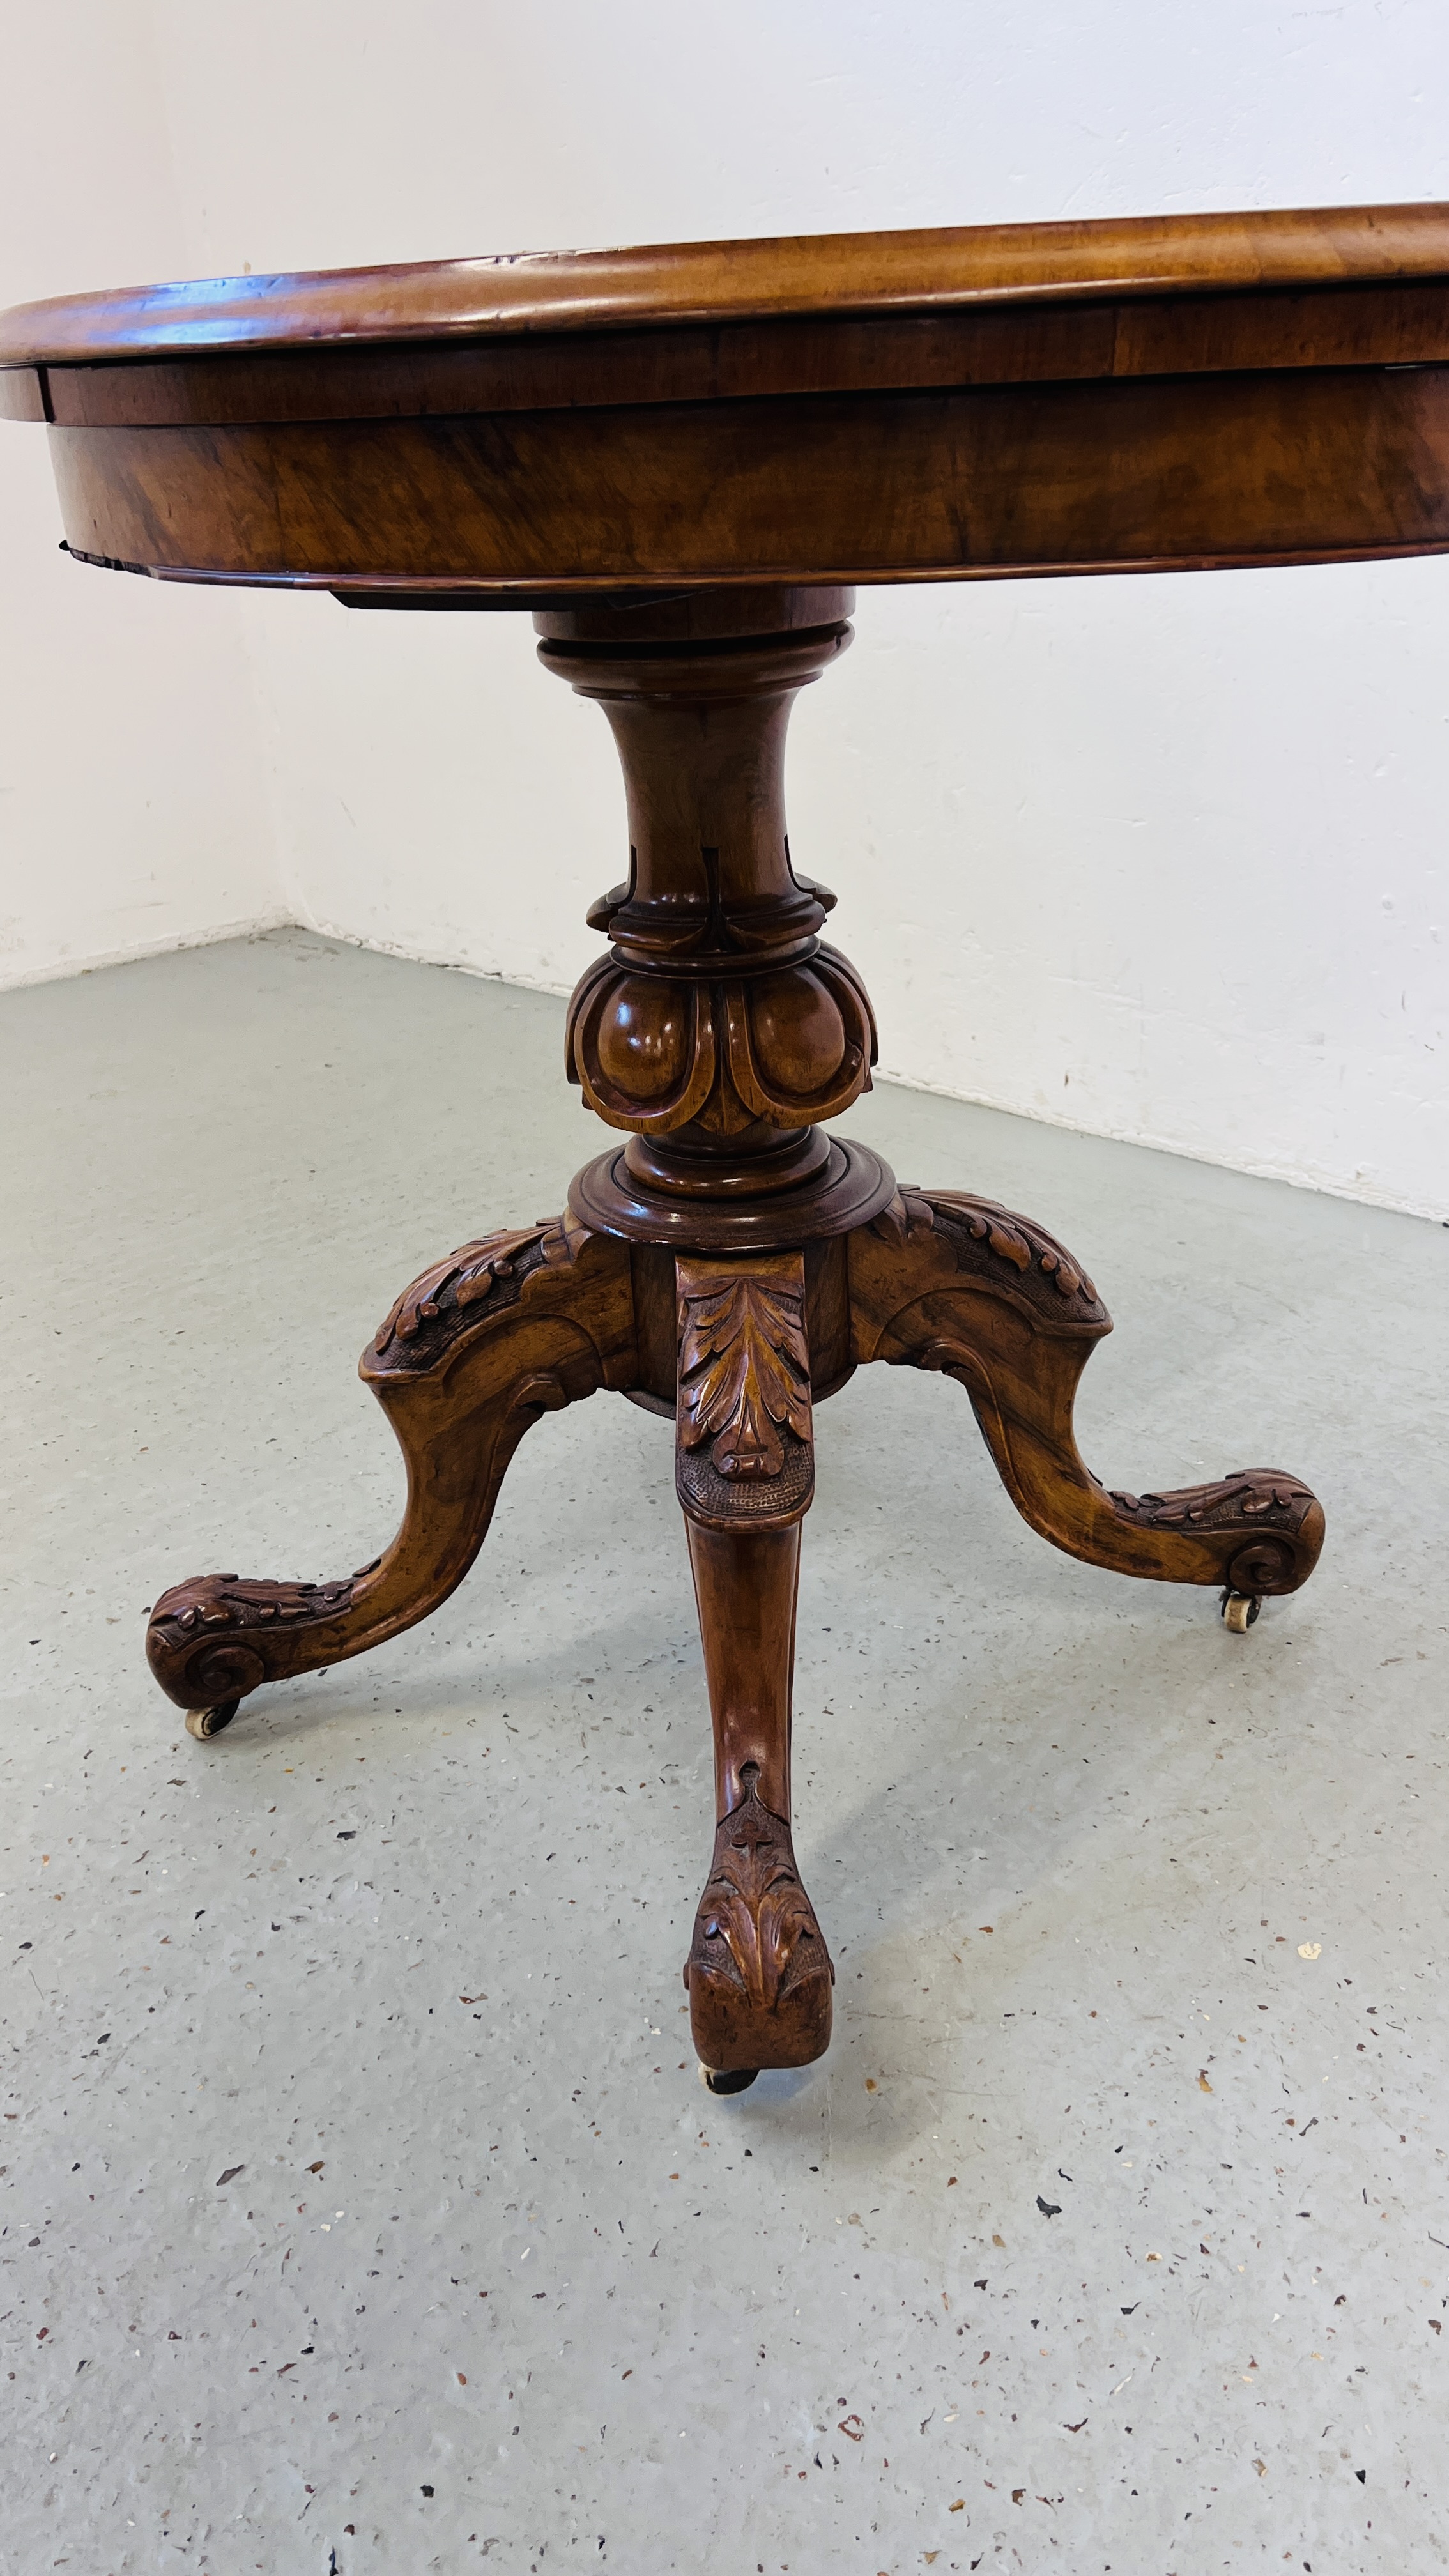 EDWARDIAN WALNUT SINGLE PEDESTAL CARD/GAMES TABLE WITH BAIZE INSERT INLAID DETAIL DIA. 92CM. - Image 5 of 10